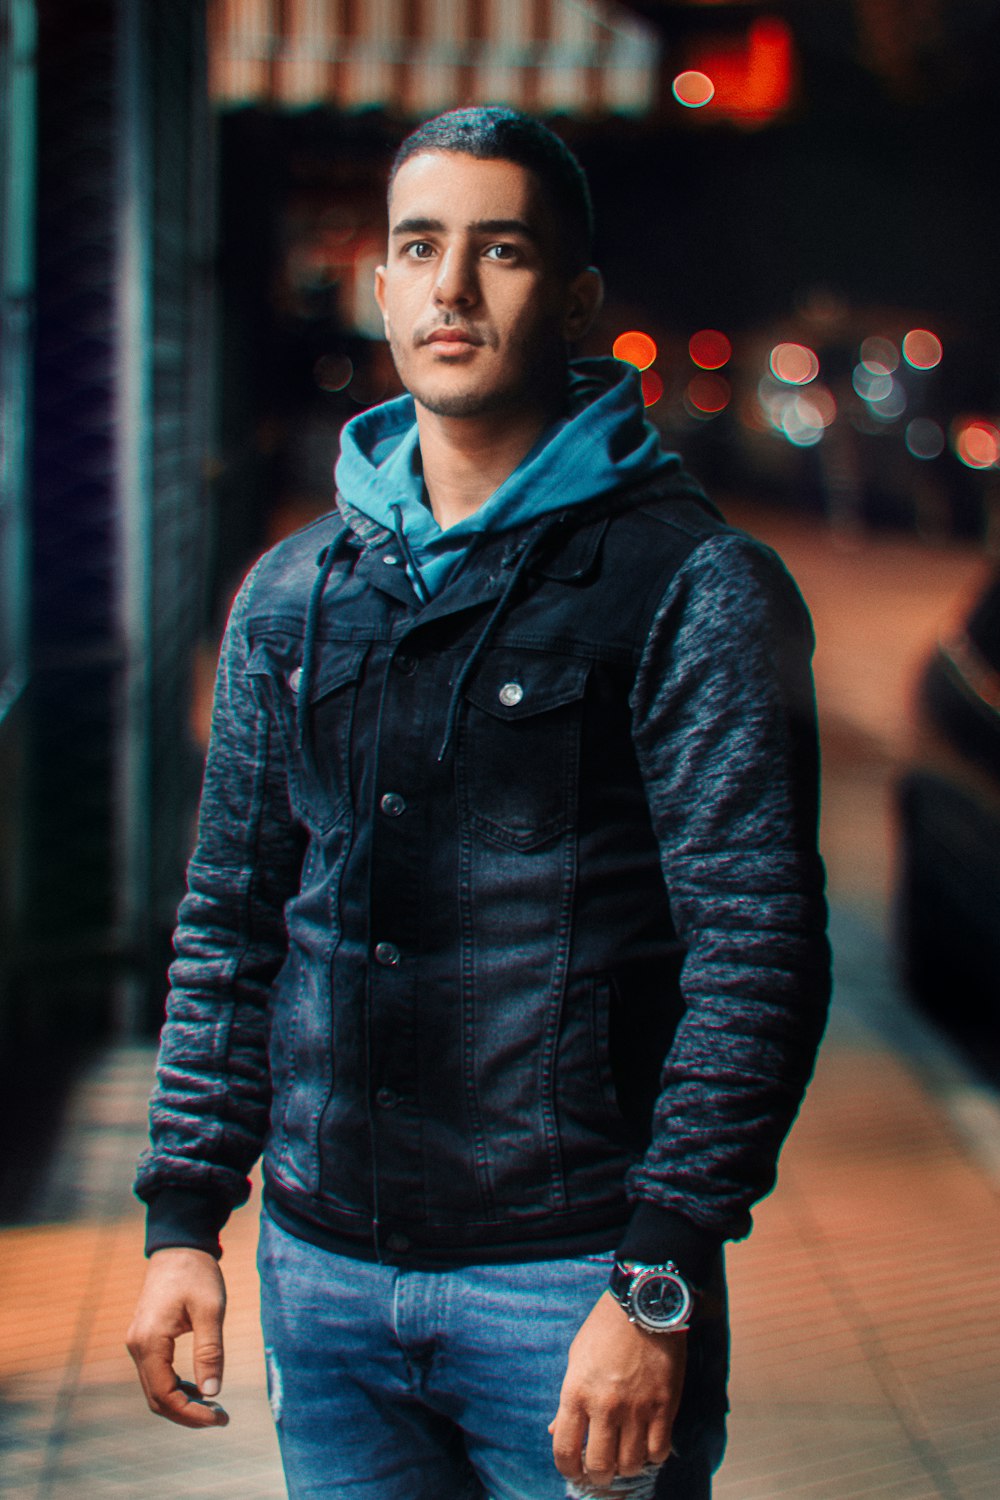 man in black leather jacket standing on street during night time